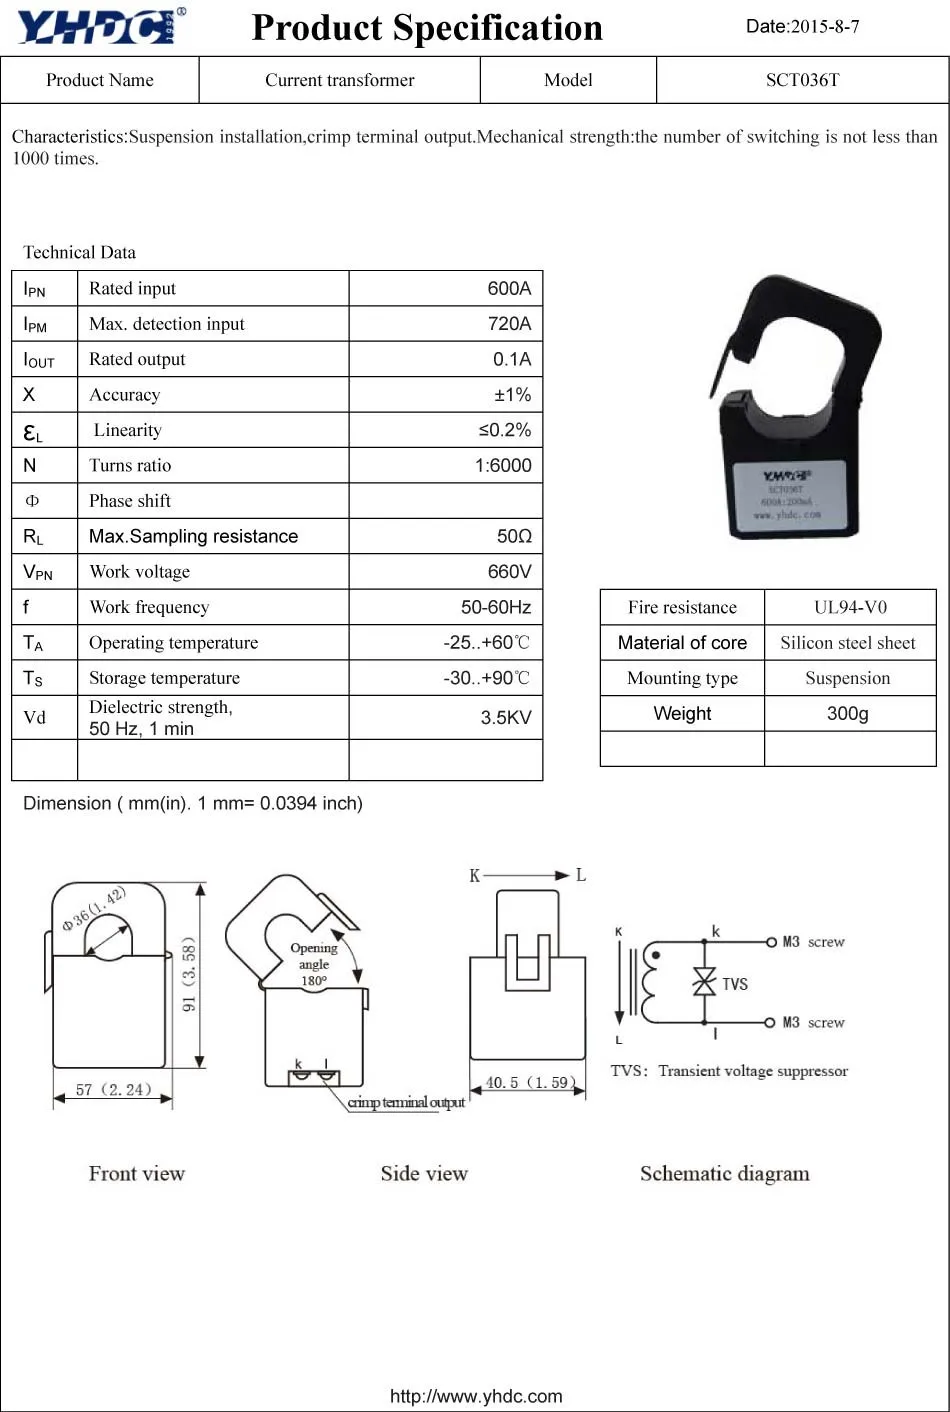 YHDC SCT036TS 600A/0.1A split core current transformer of current clamp